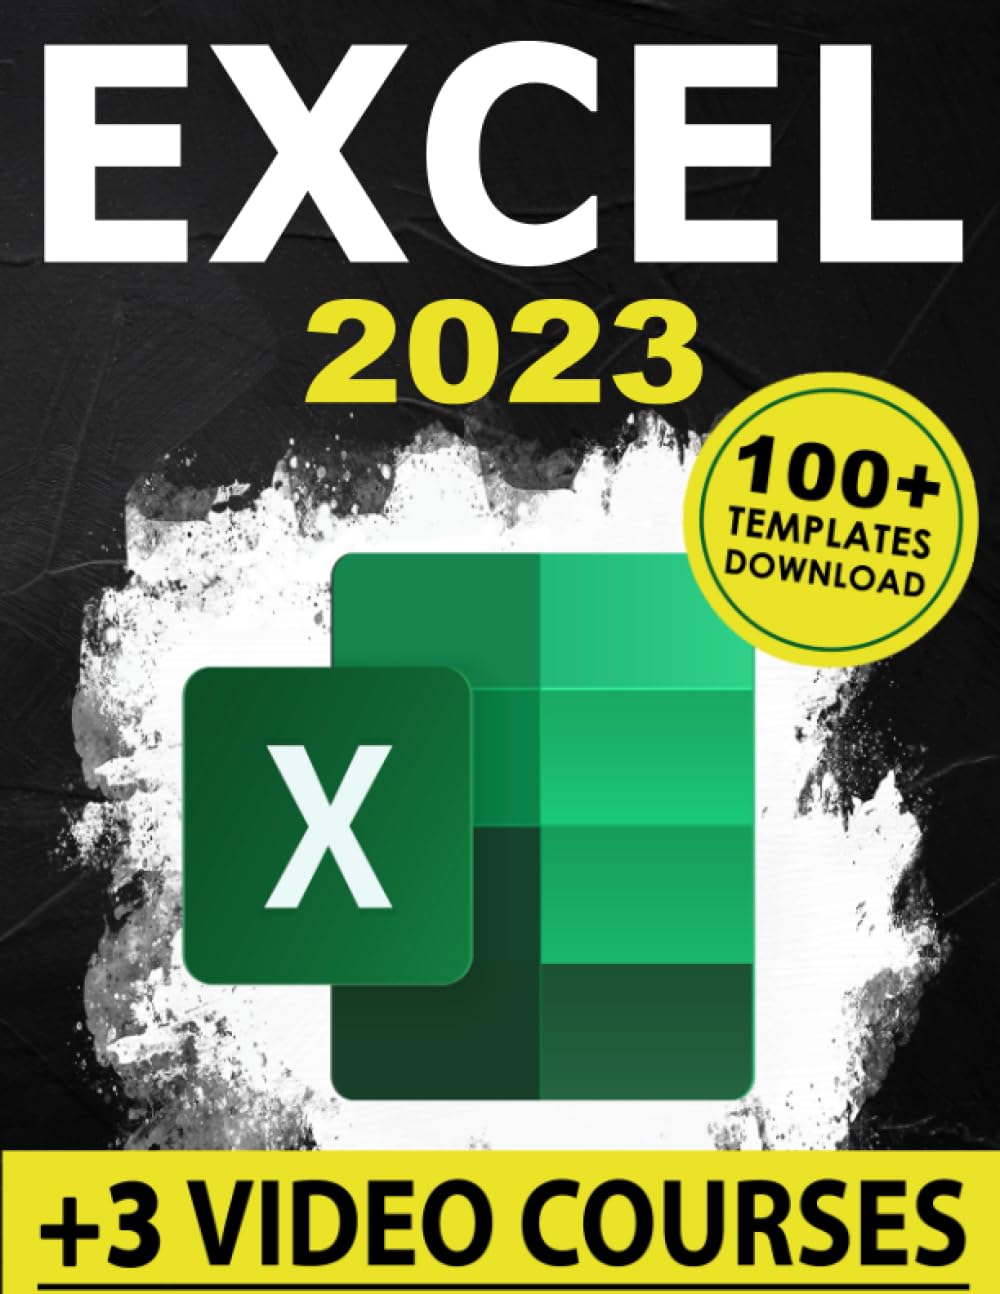 Excel: The Complete Illustrative Guide for Beginners to Learning any Fundamental, Formula, Function and Chart in Less than 5 Minutes with Simple and Real-Life Examples